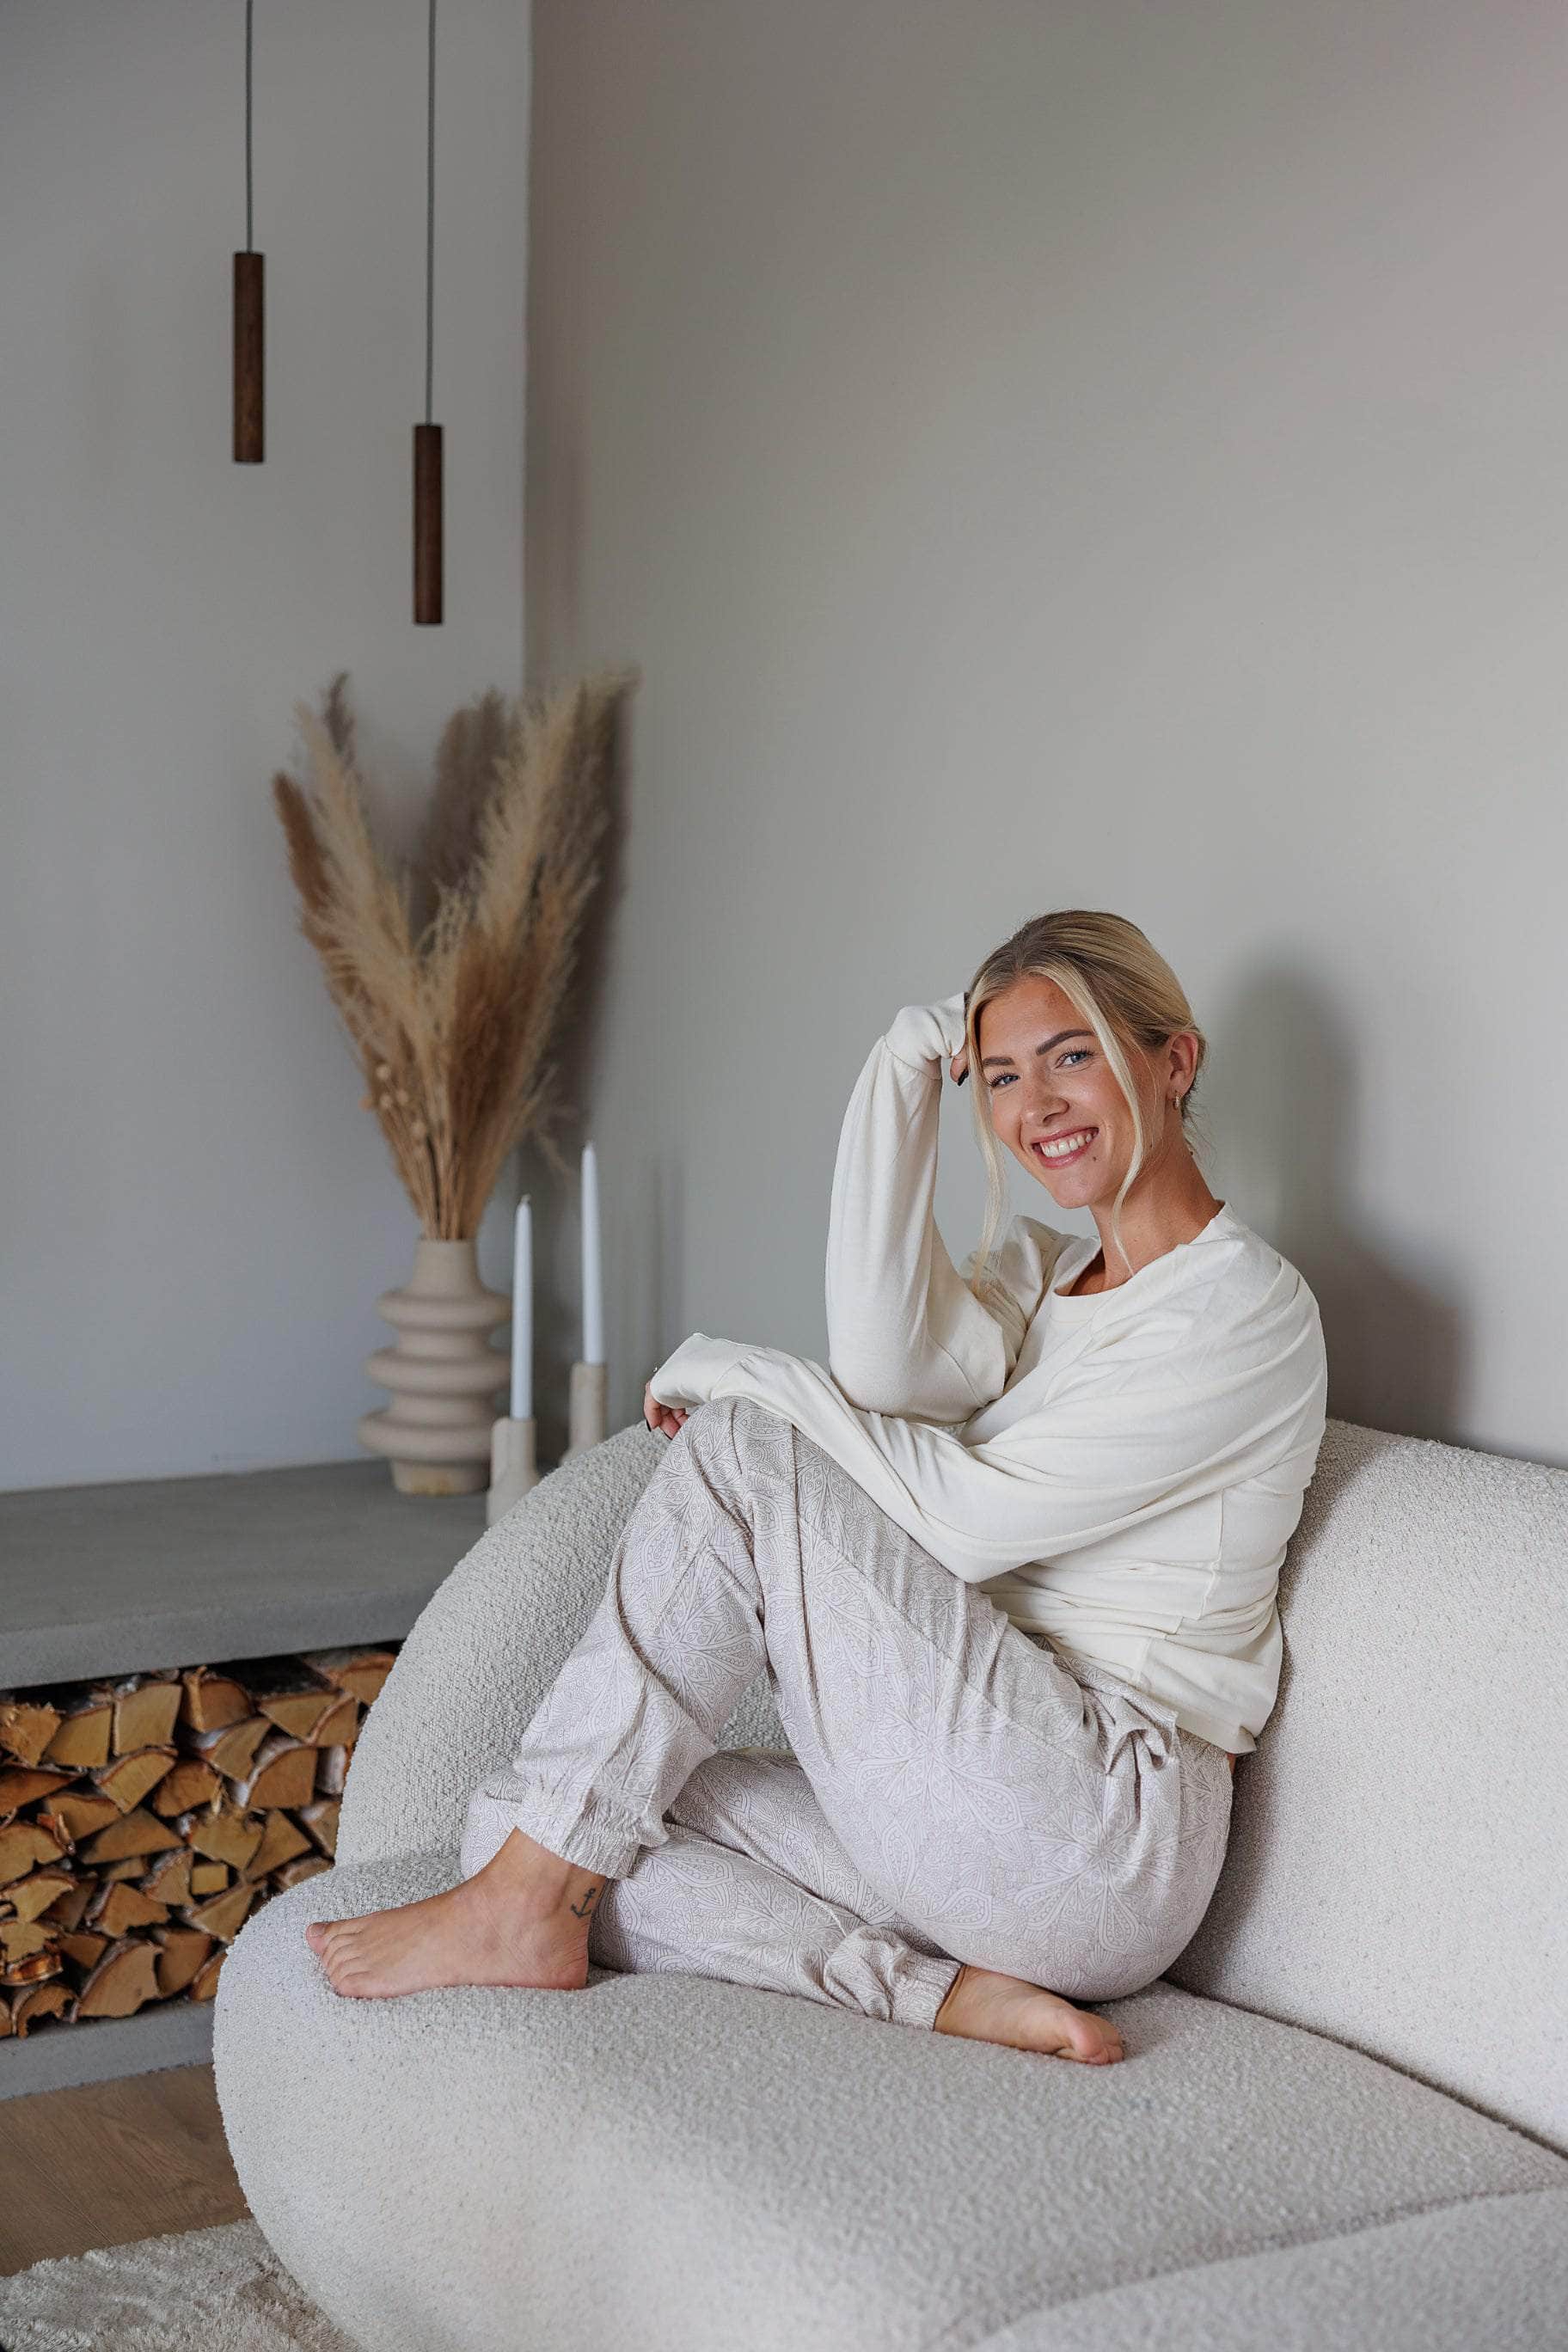 ByLien-Shop Comfort pyjamas - Simply Taupe